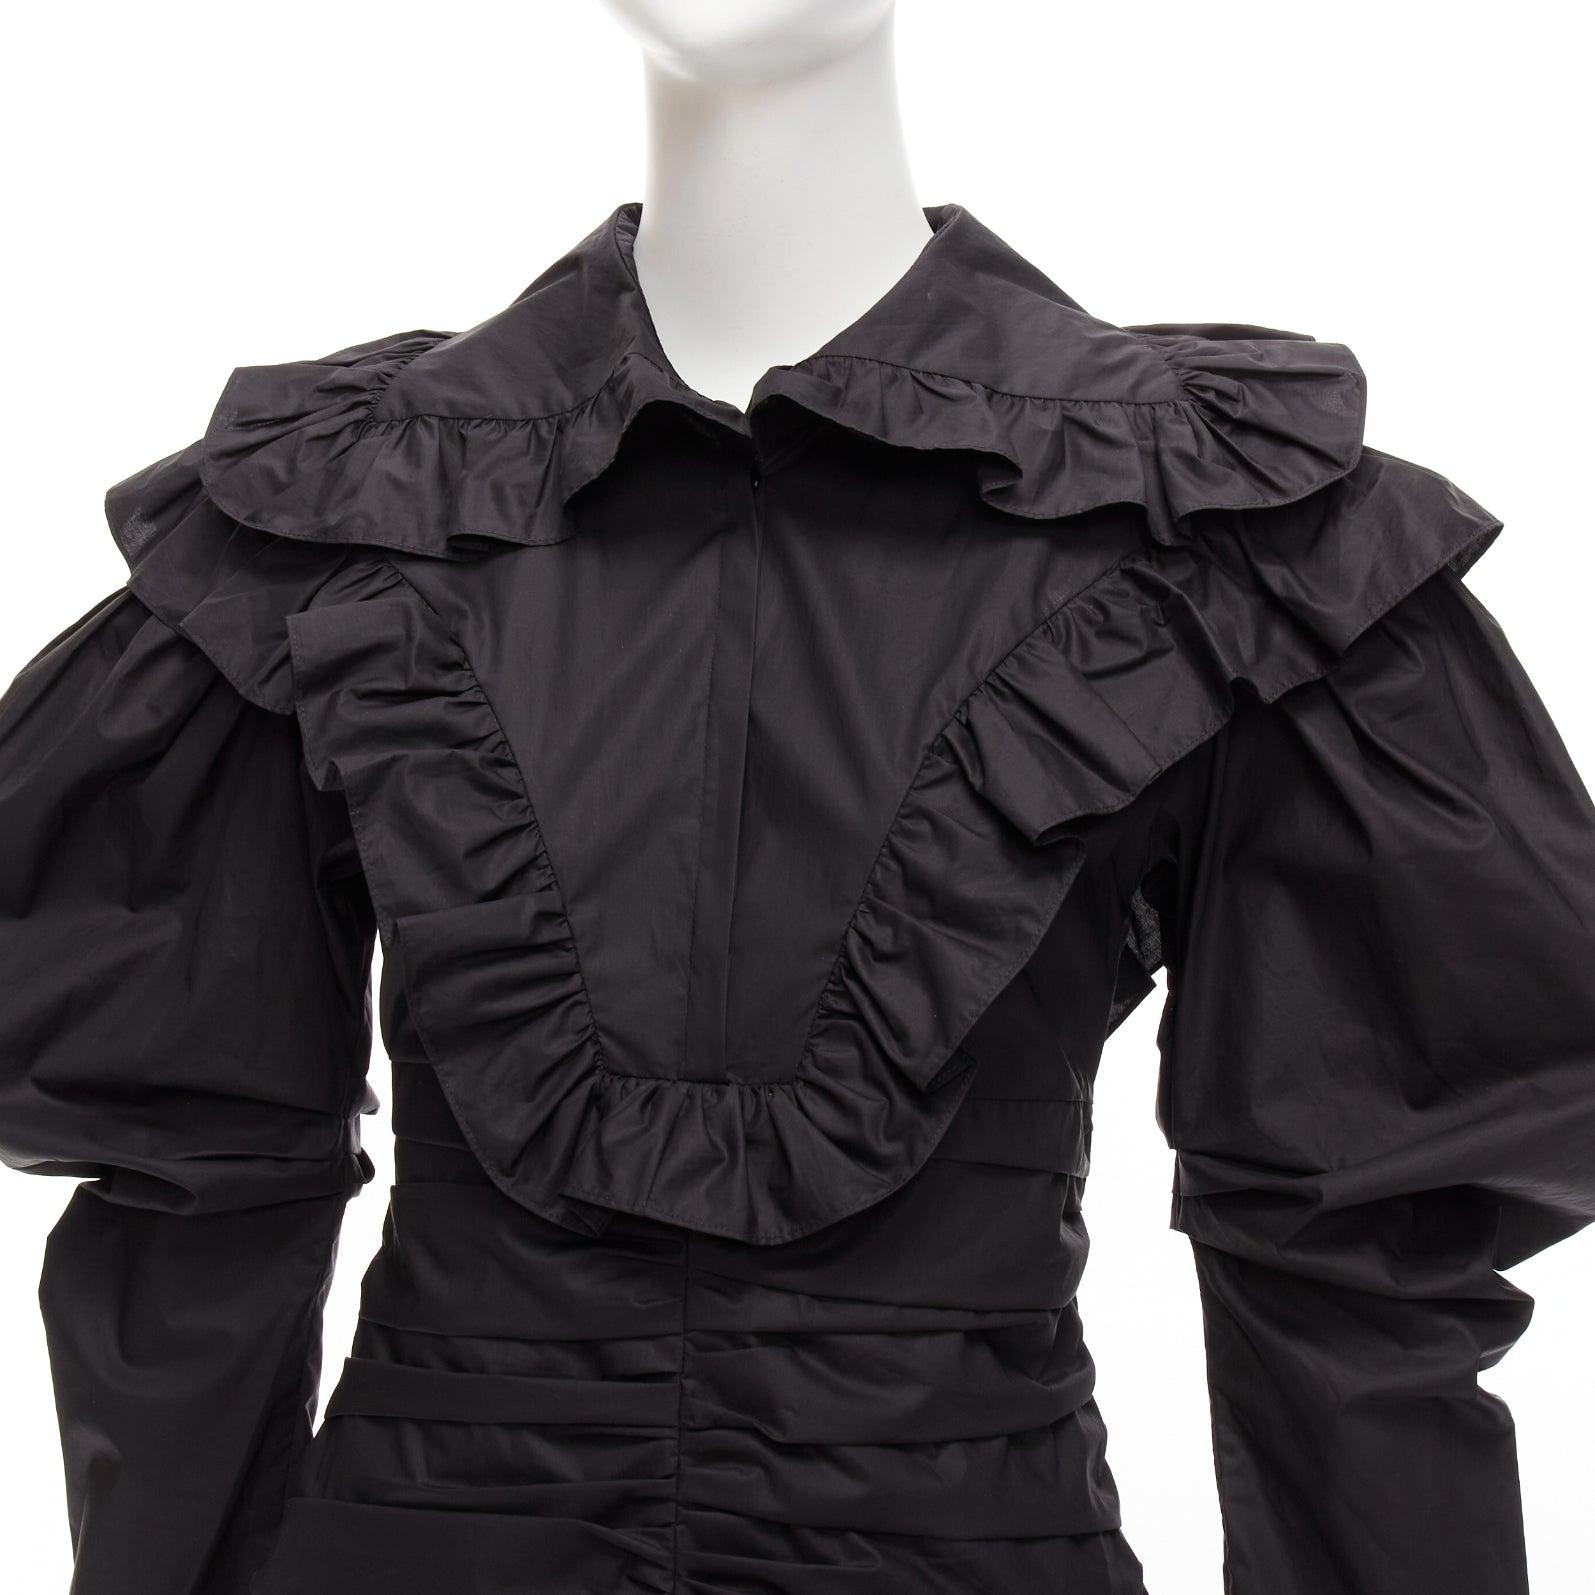 PHILOSOPHY DI LORENZO SERAFINI black poplin ruffle collar puff sleeve dress IT38 XS
Reference: AAWC/A00713
Brand: Philosophy
Material: Cotton
Color: Black
Pattern: Solid
Closure: Zip
Extra Details: Side zip. Coated cotton.
Made in: